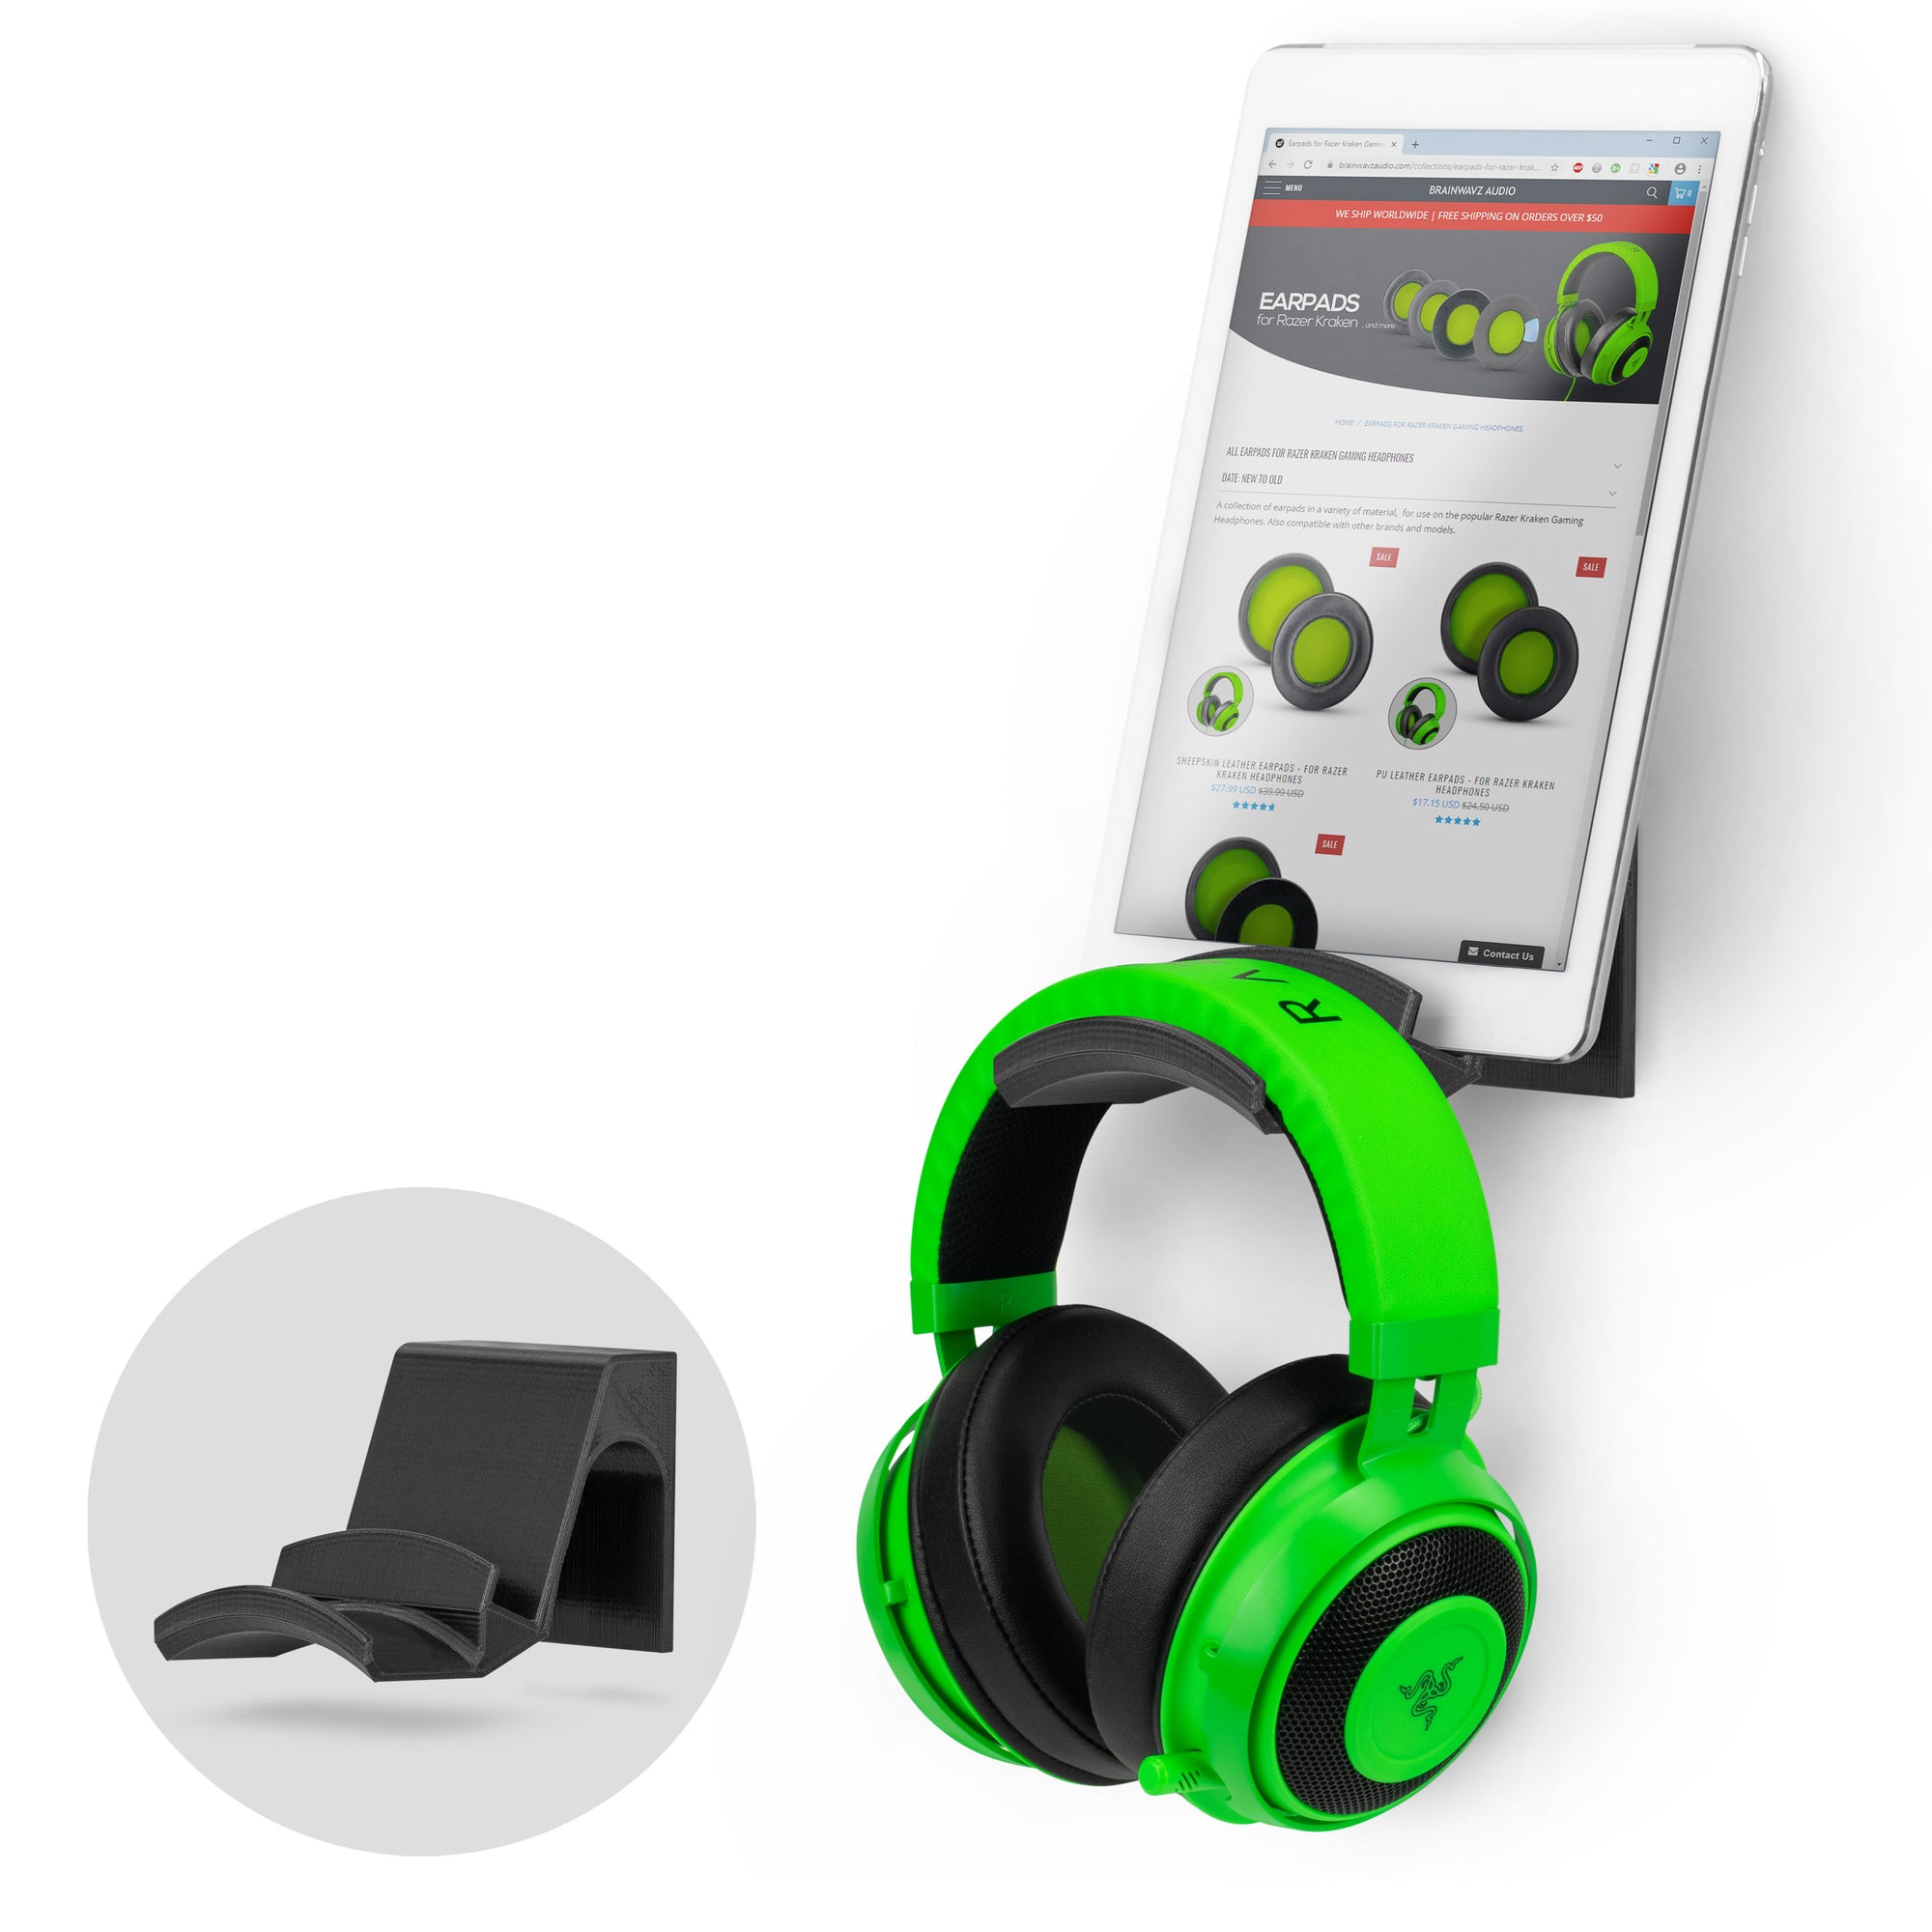 The Perch - Tablet / Phone Mount & Headphone Hanger - iPhone, iPad & Most Android Devices